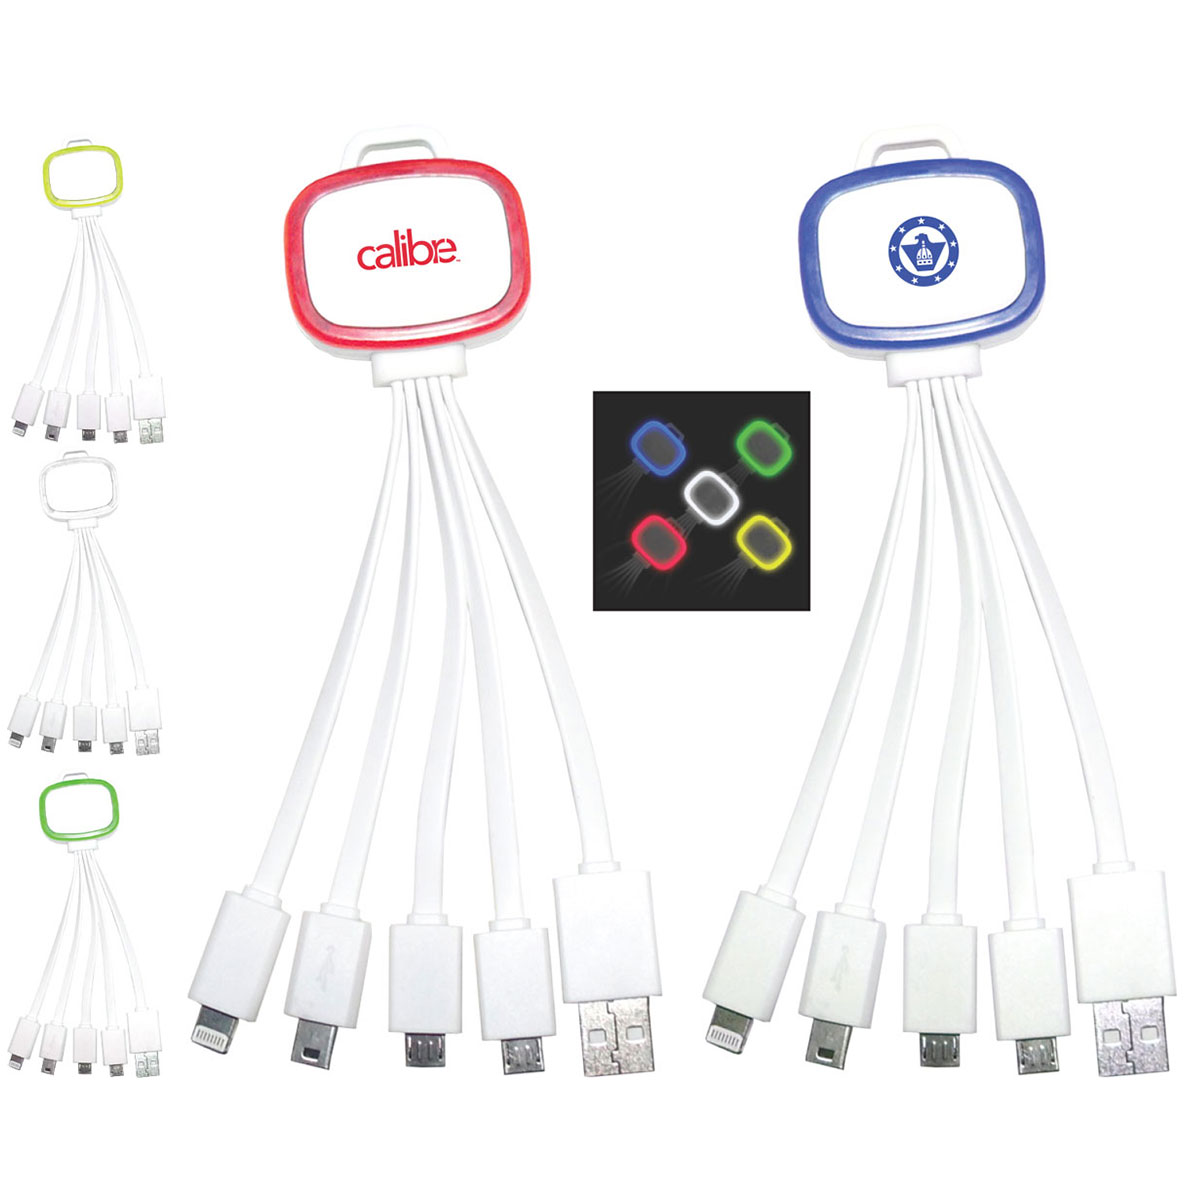 5 in 1 USB LED Lights Adapter Charging Cable